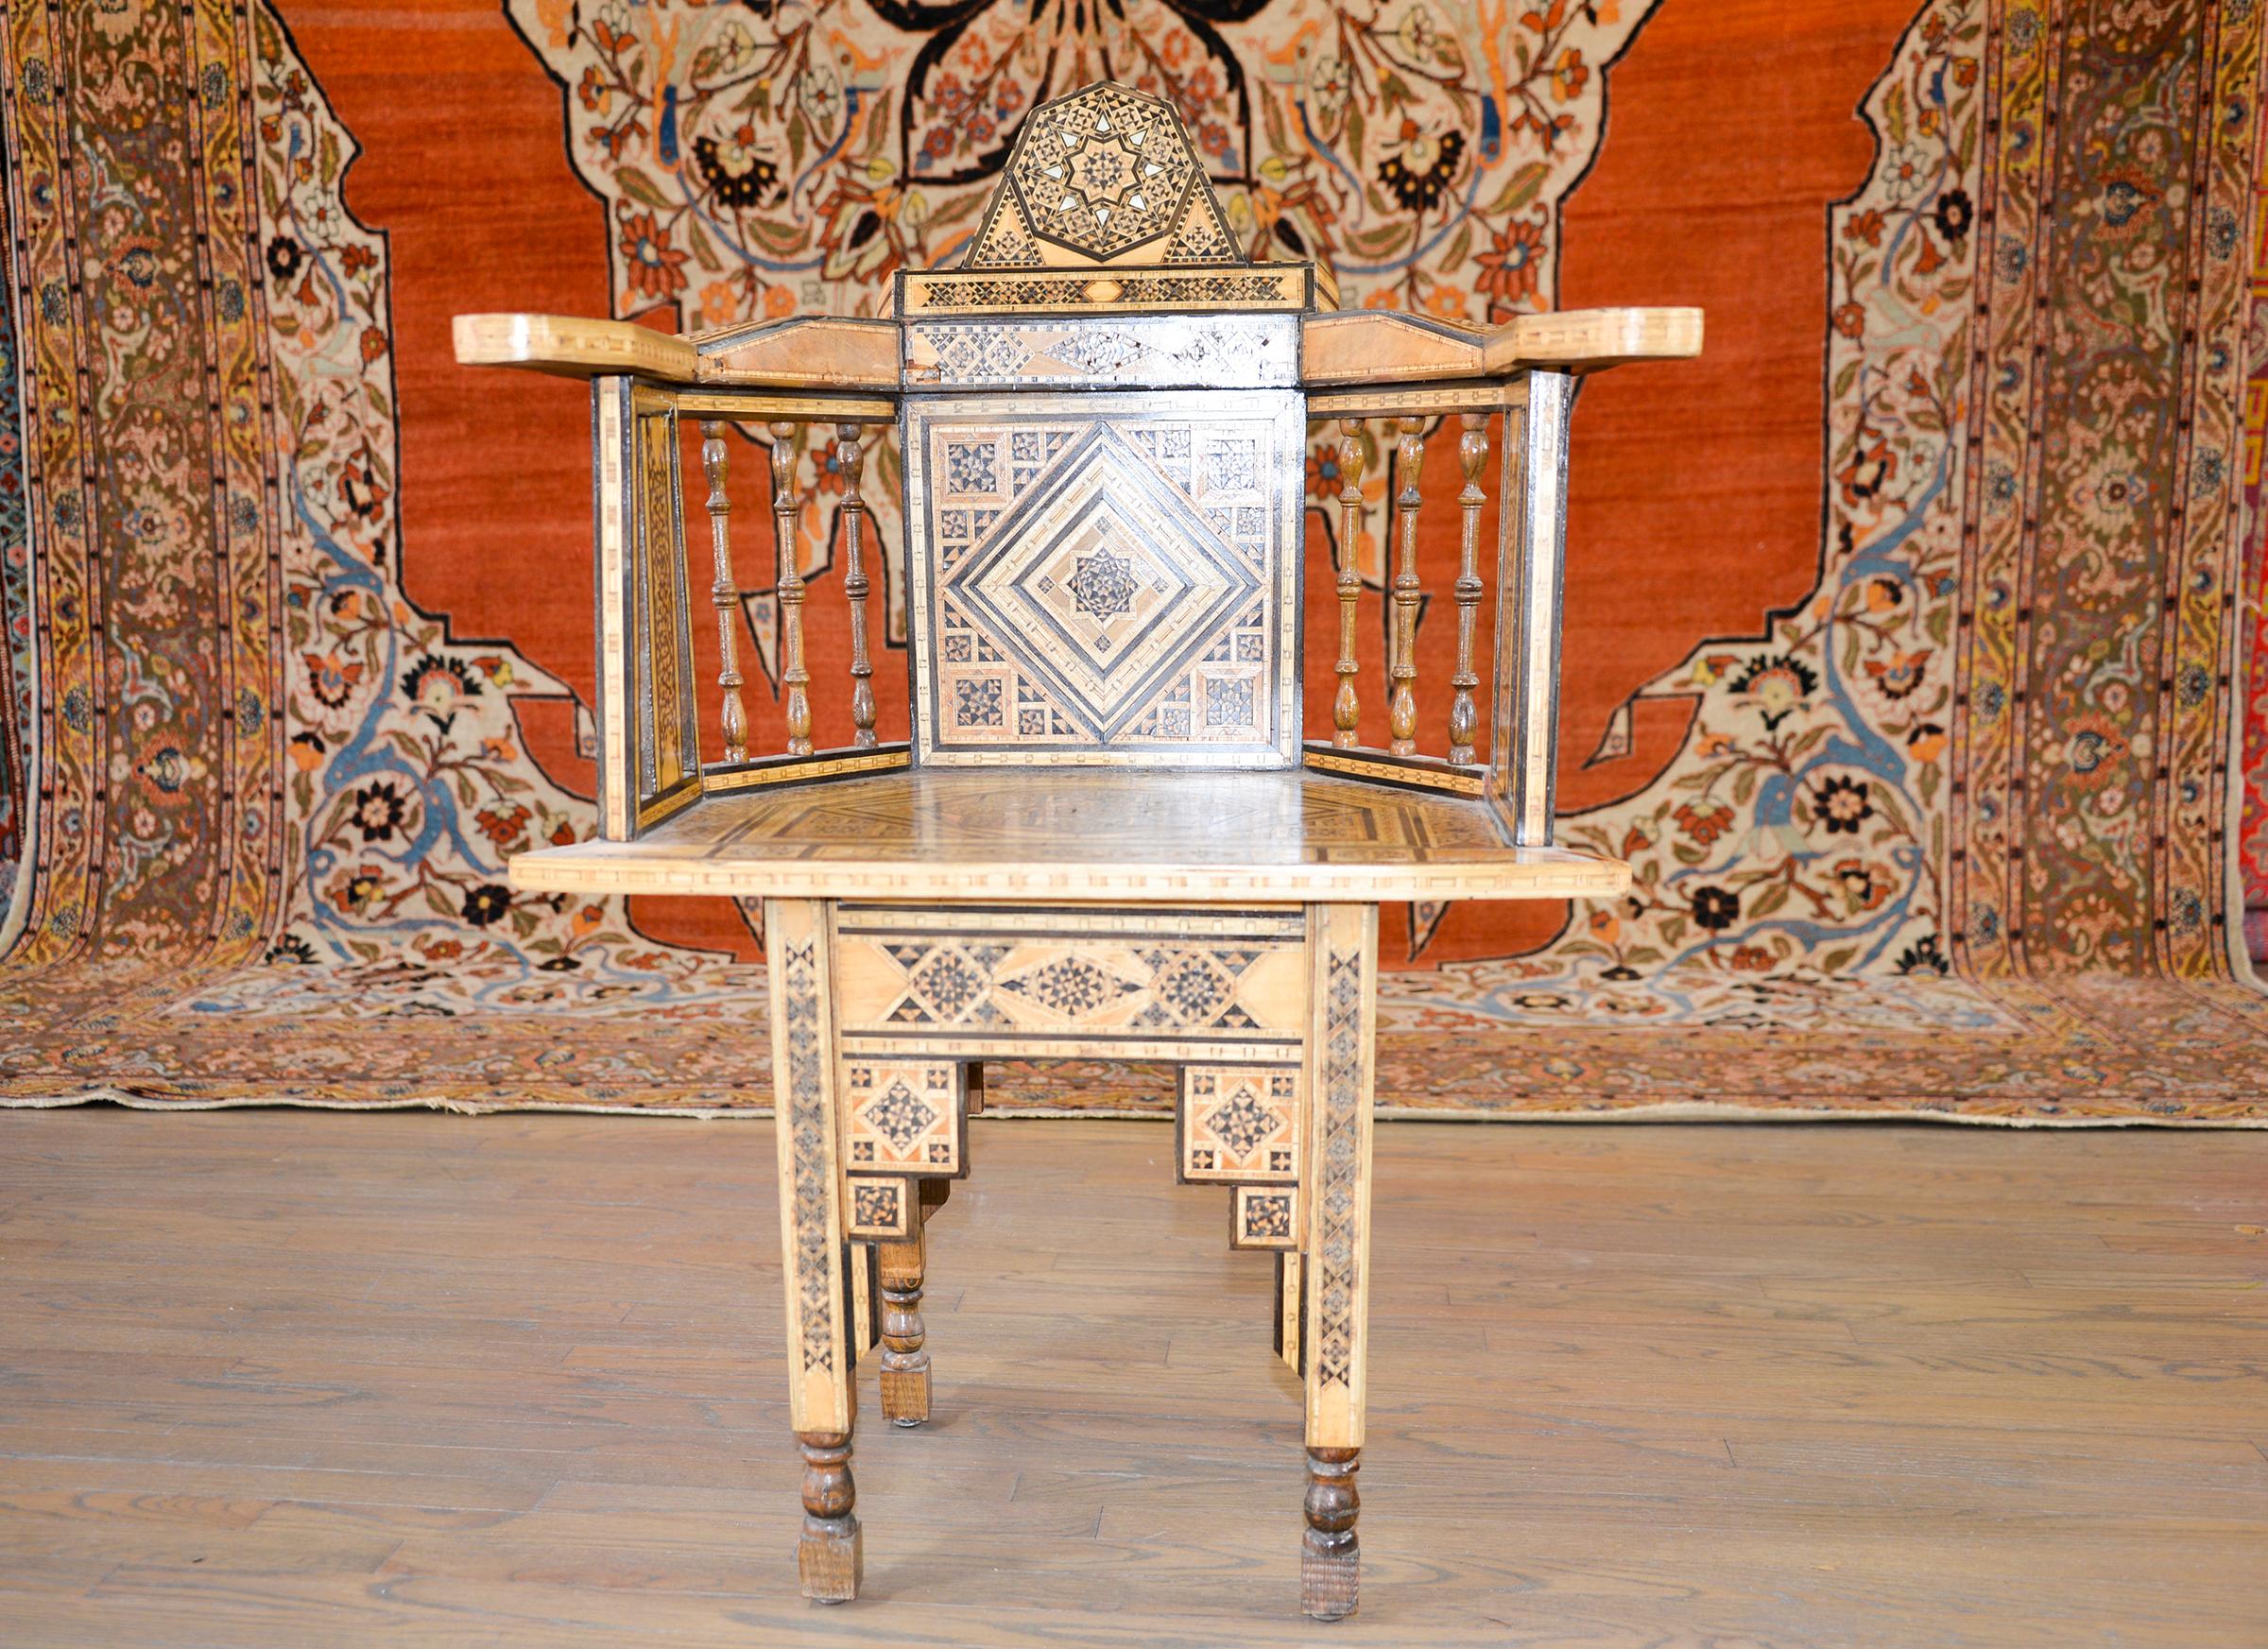 An early 20th century Moroccan armchair with an elaborate pattern of repeated large and small eight-point stars executed in inlaid exotic and ebonized woods and mother-of-pearl. The sloping arms are supported by turned spindles, and the legs are